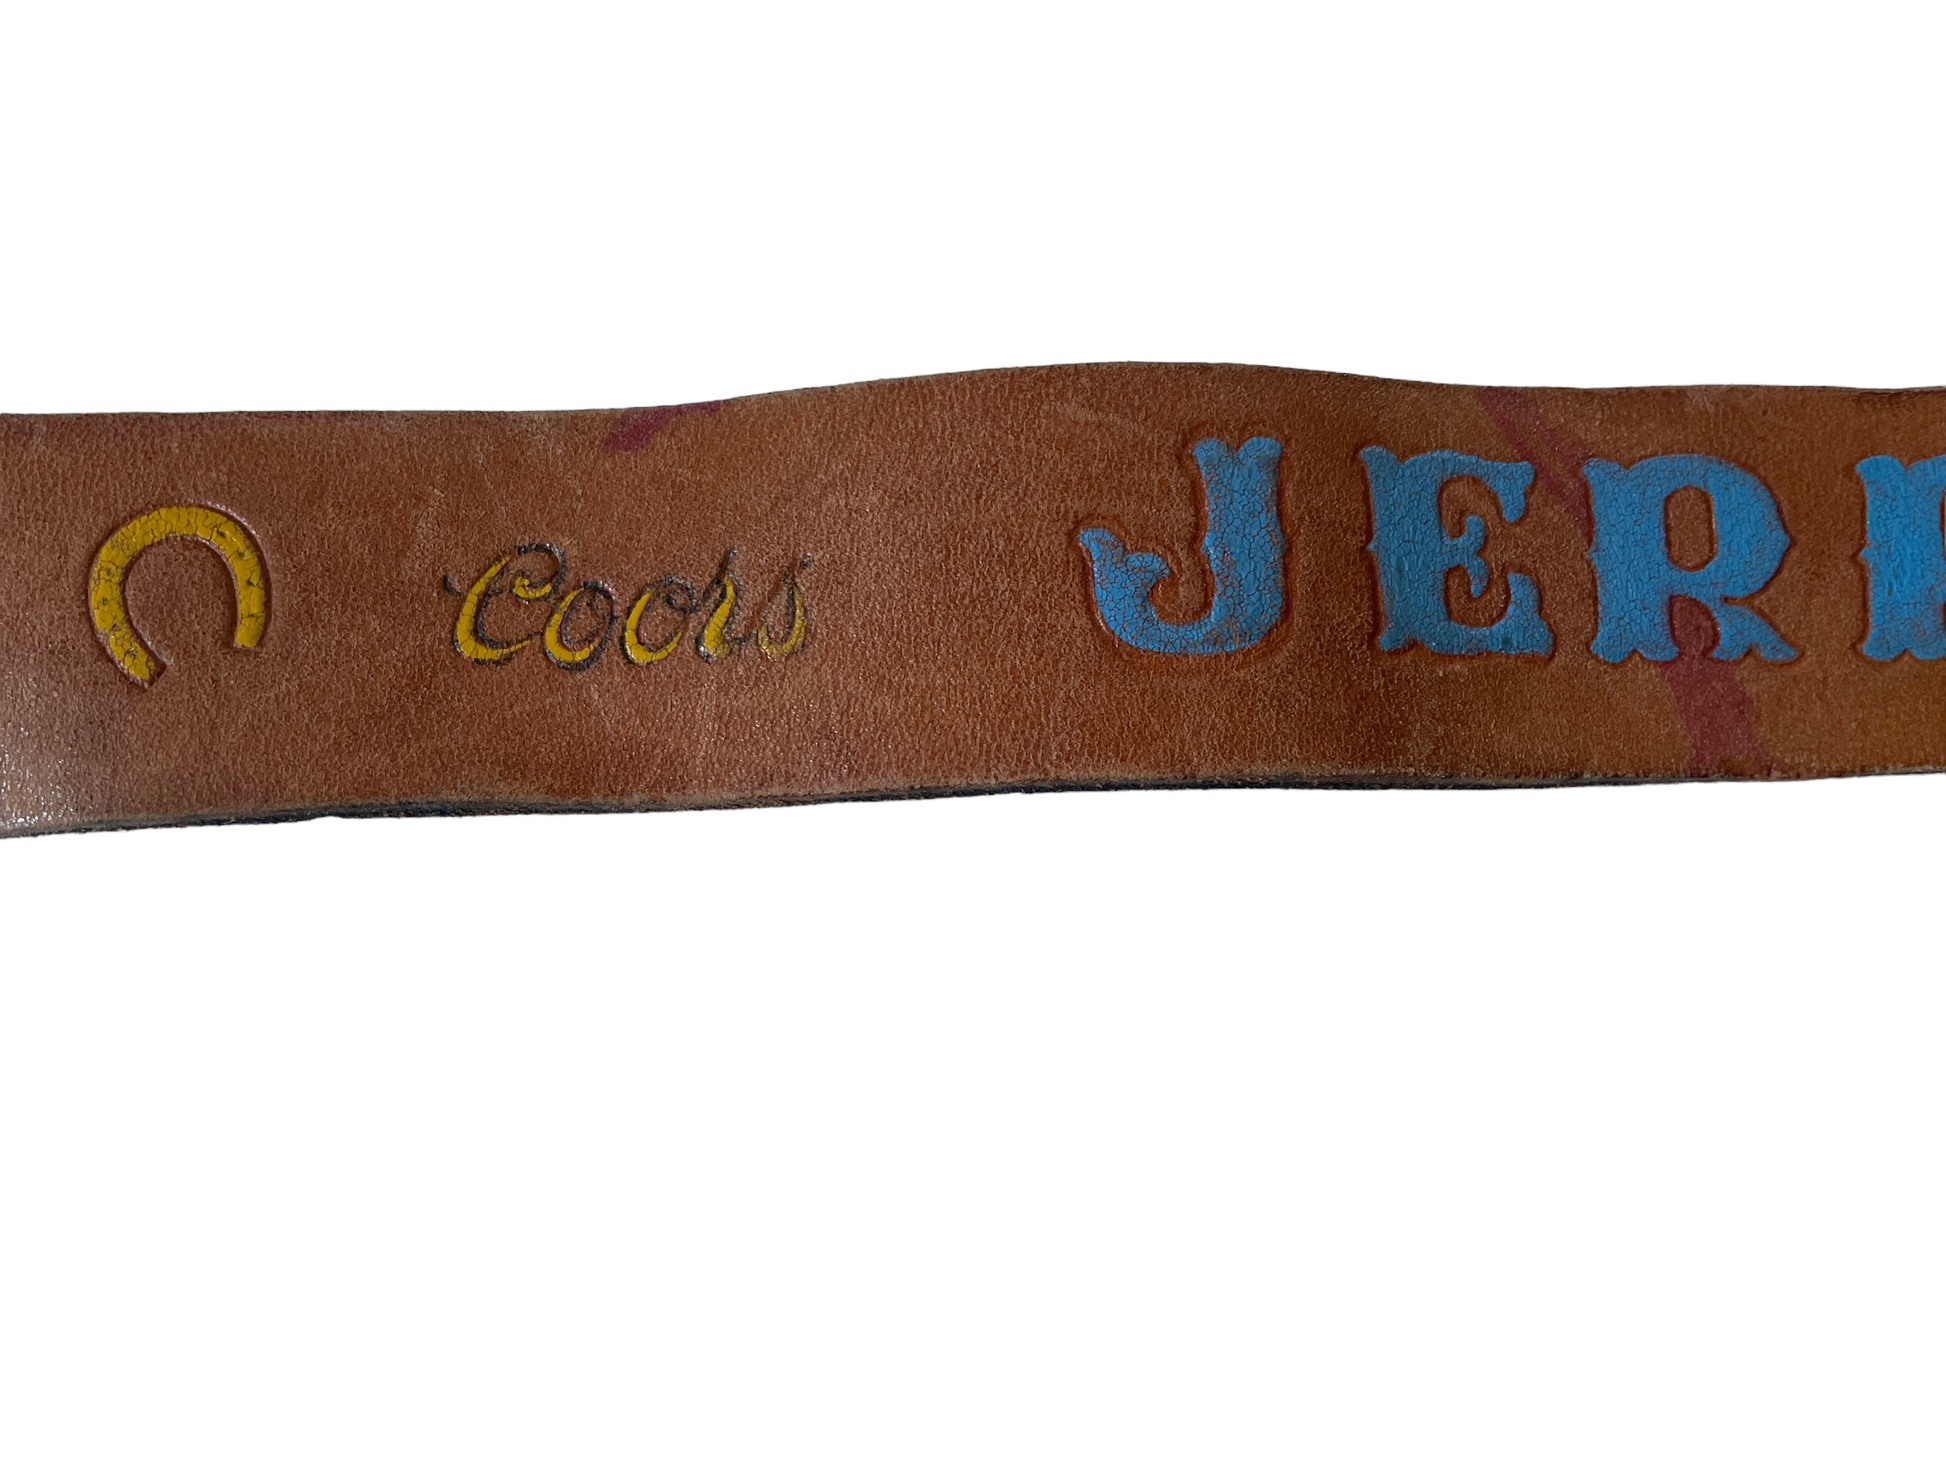 Vintage Hand Painted Coors Trucker Belt View of hand painted belt.